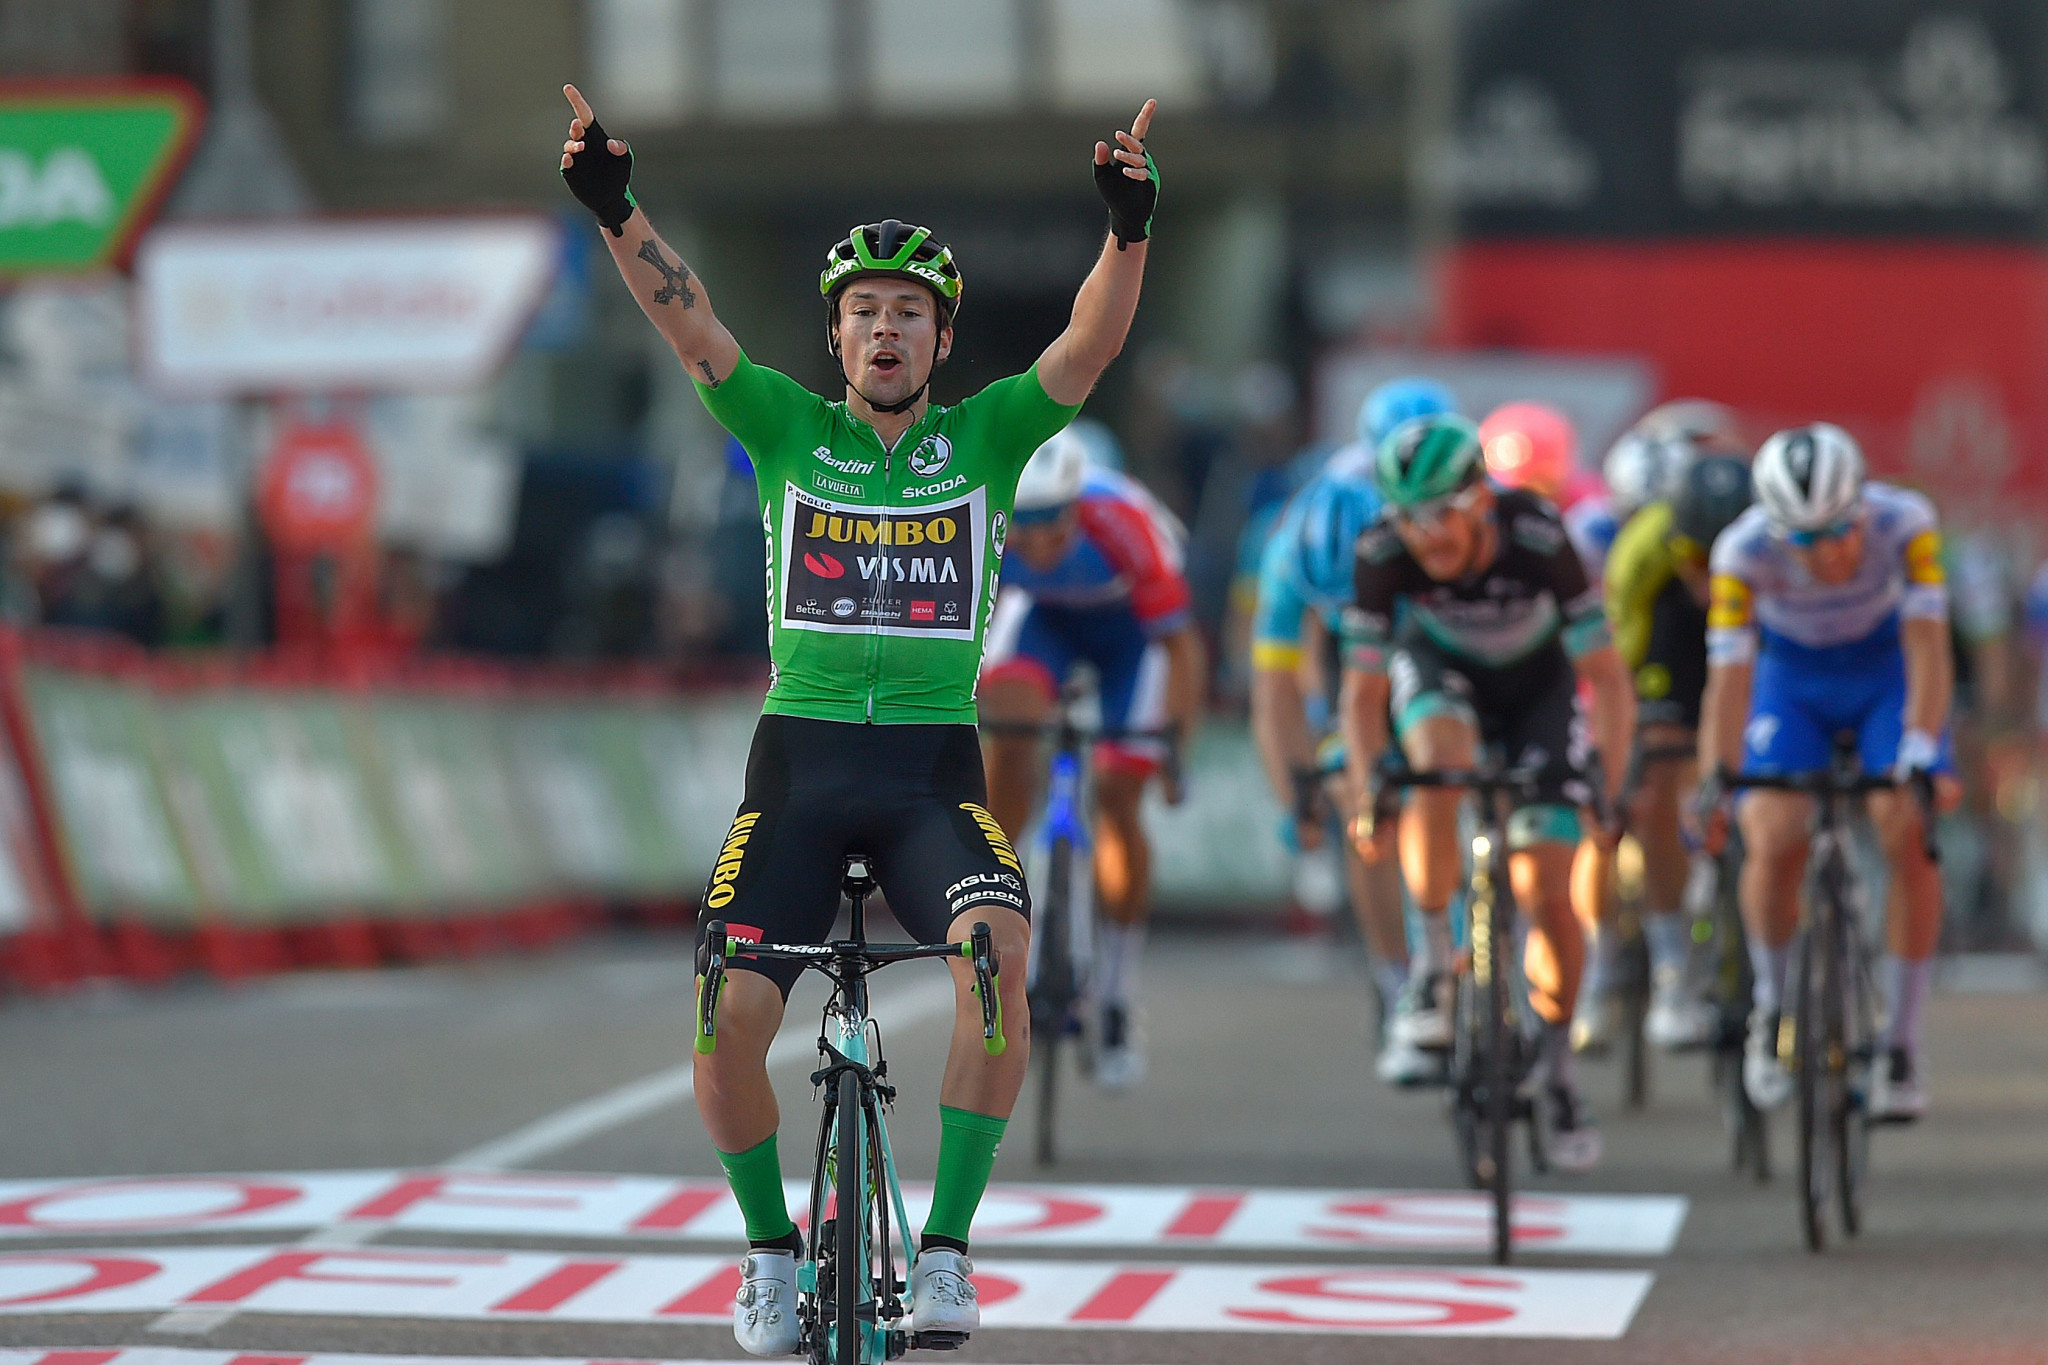 Roglič clinches third stage win to move into race lead at Vuelta a España